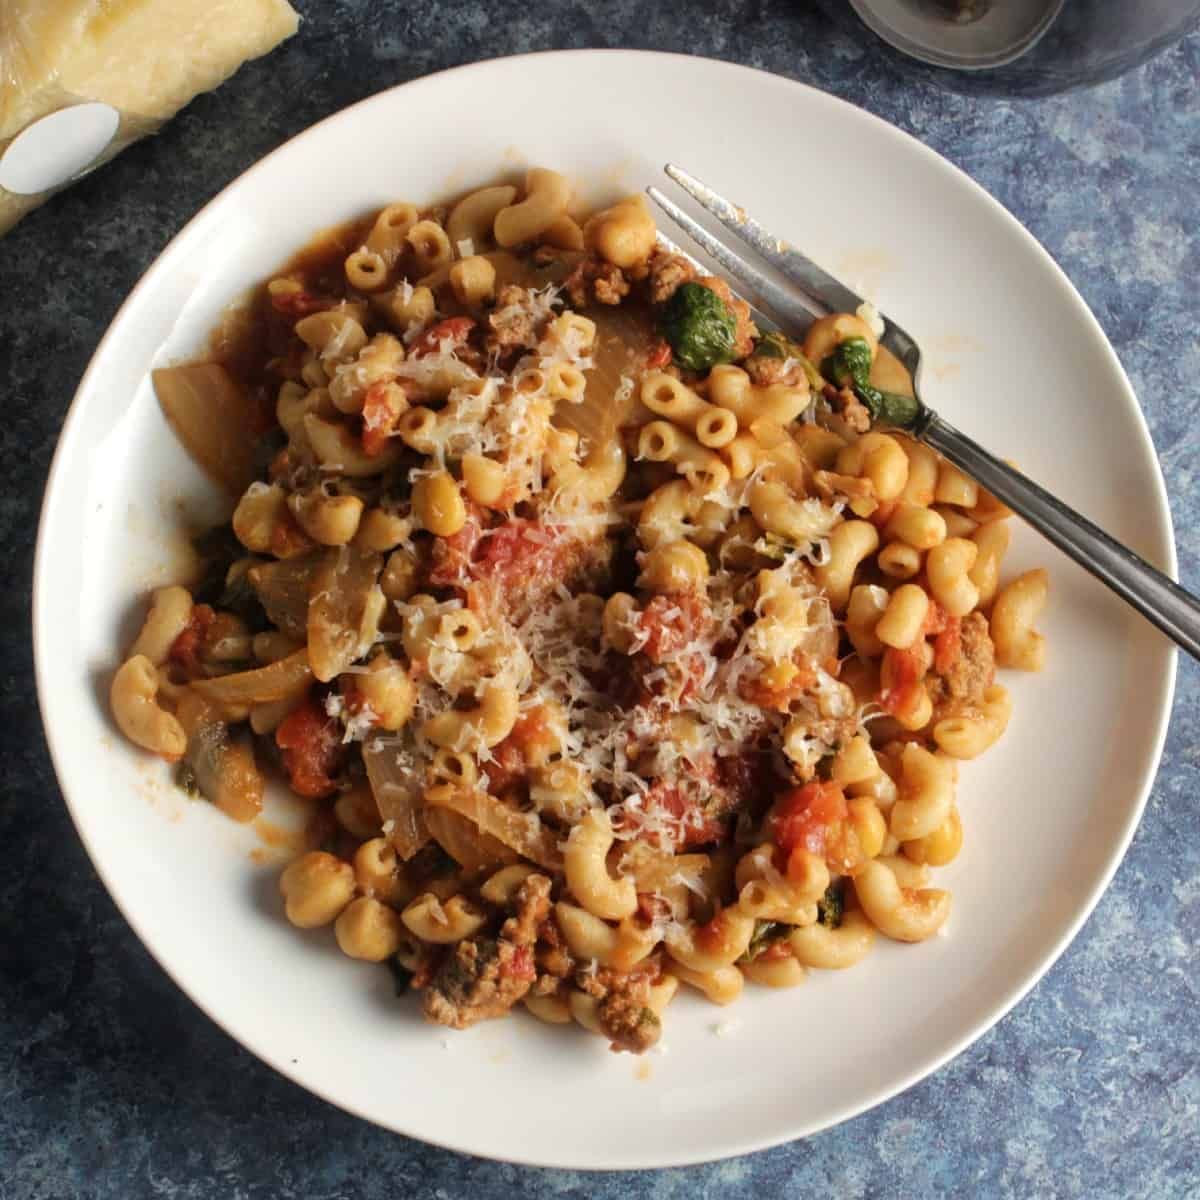 Everyday Pasta Sauce with Ground Beef and Chickpeas is on this week's menu! #mealplan buff.ly/2CUGliv